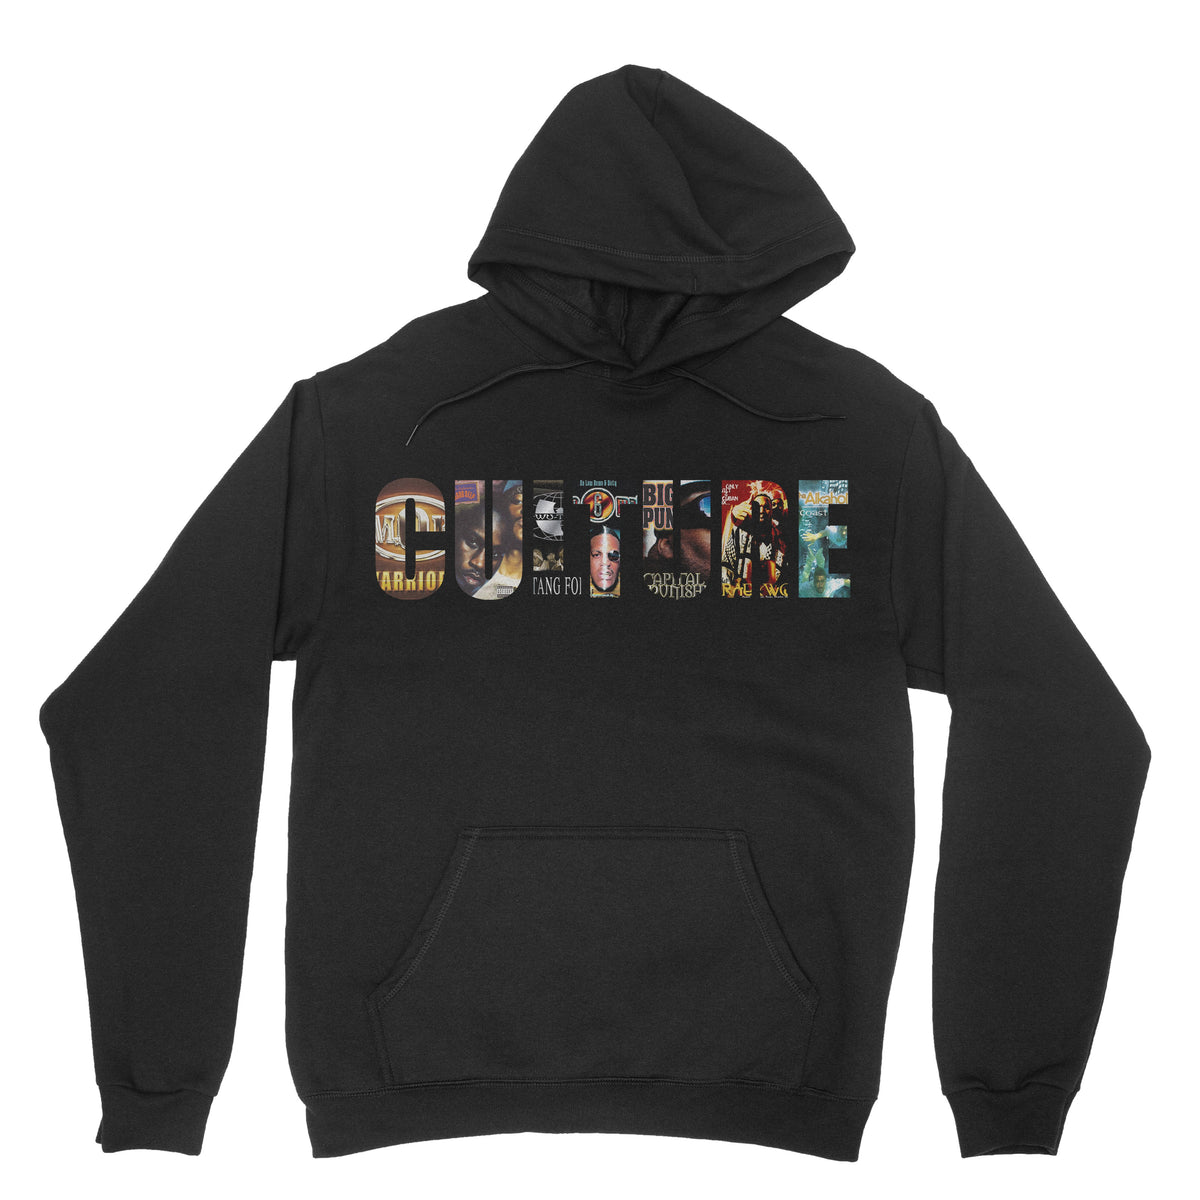 Loud Records Artist Album Culture Hoodie 8.5oz - For The Culture Clothing Inc.